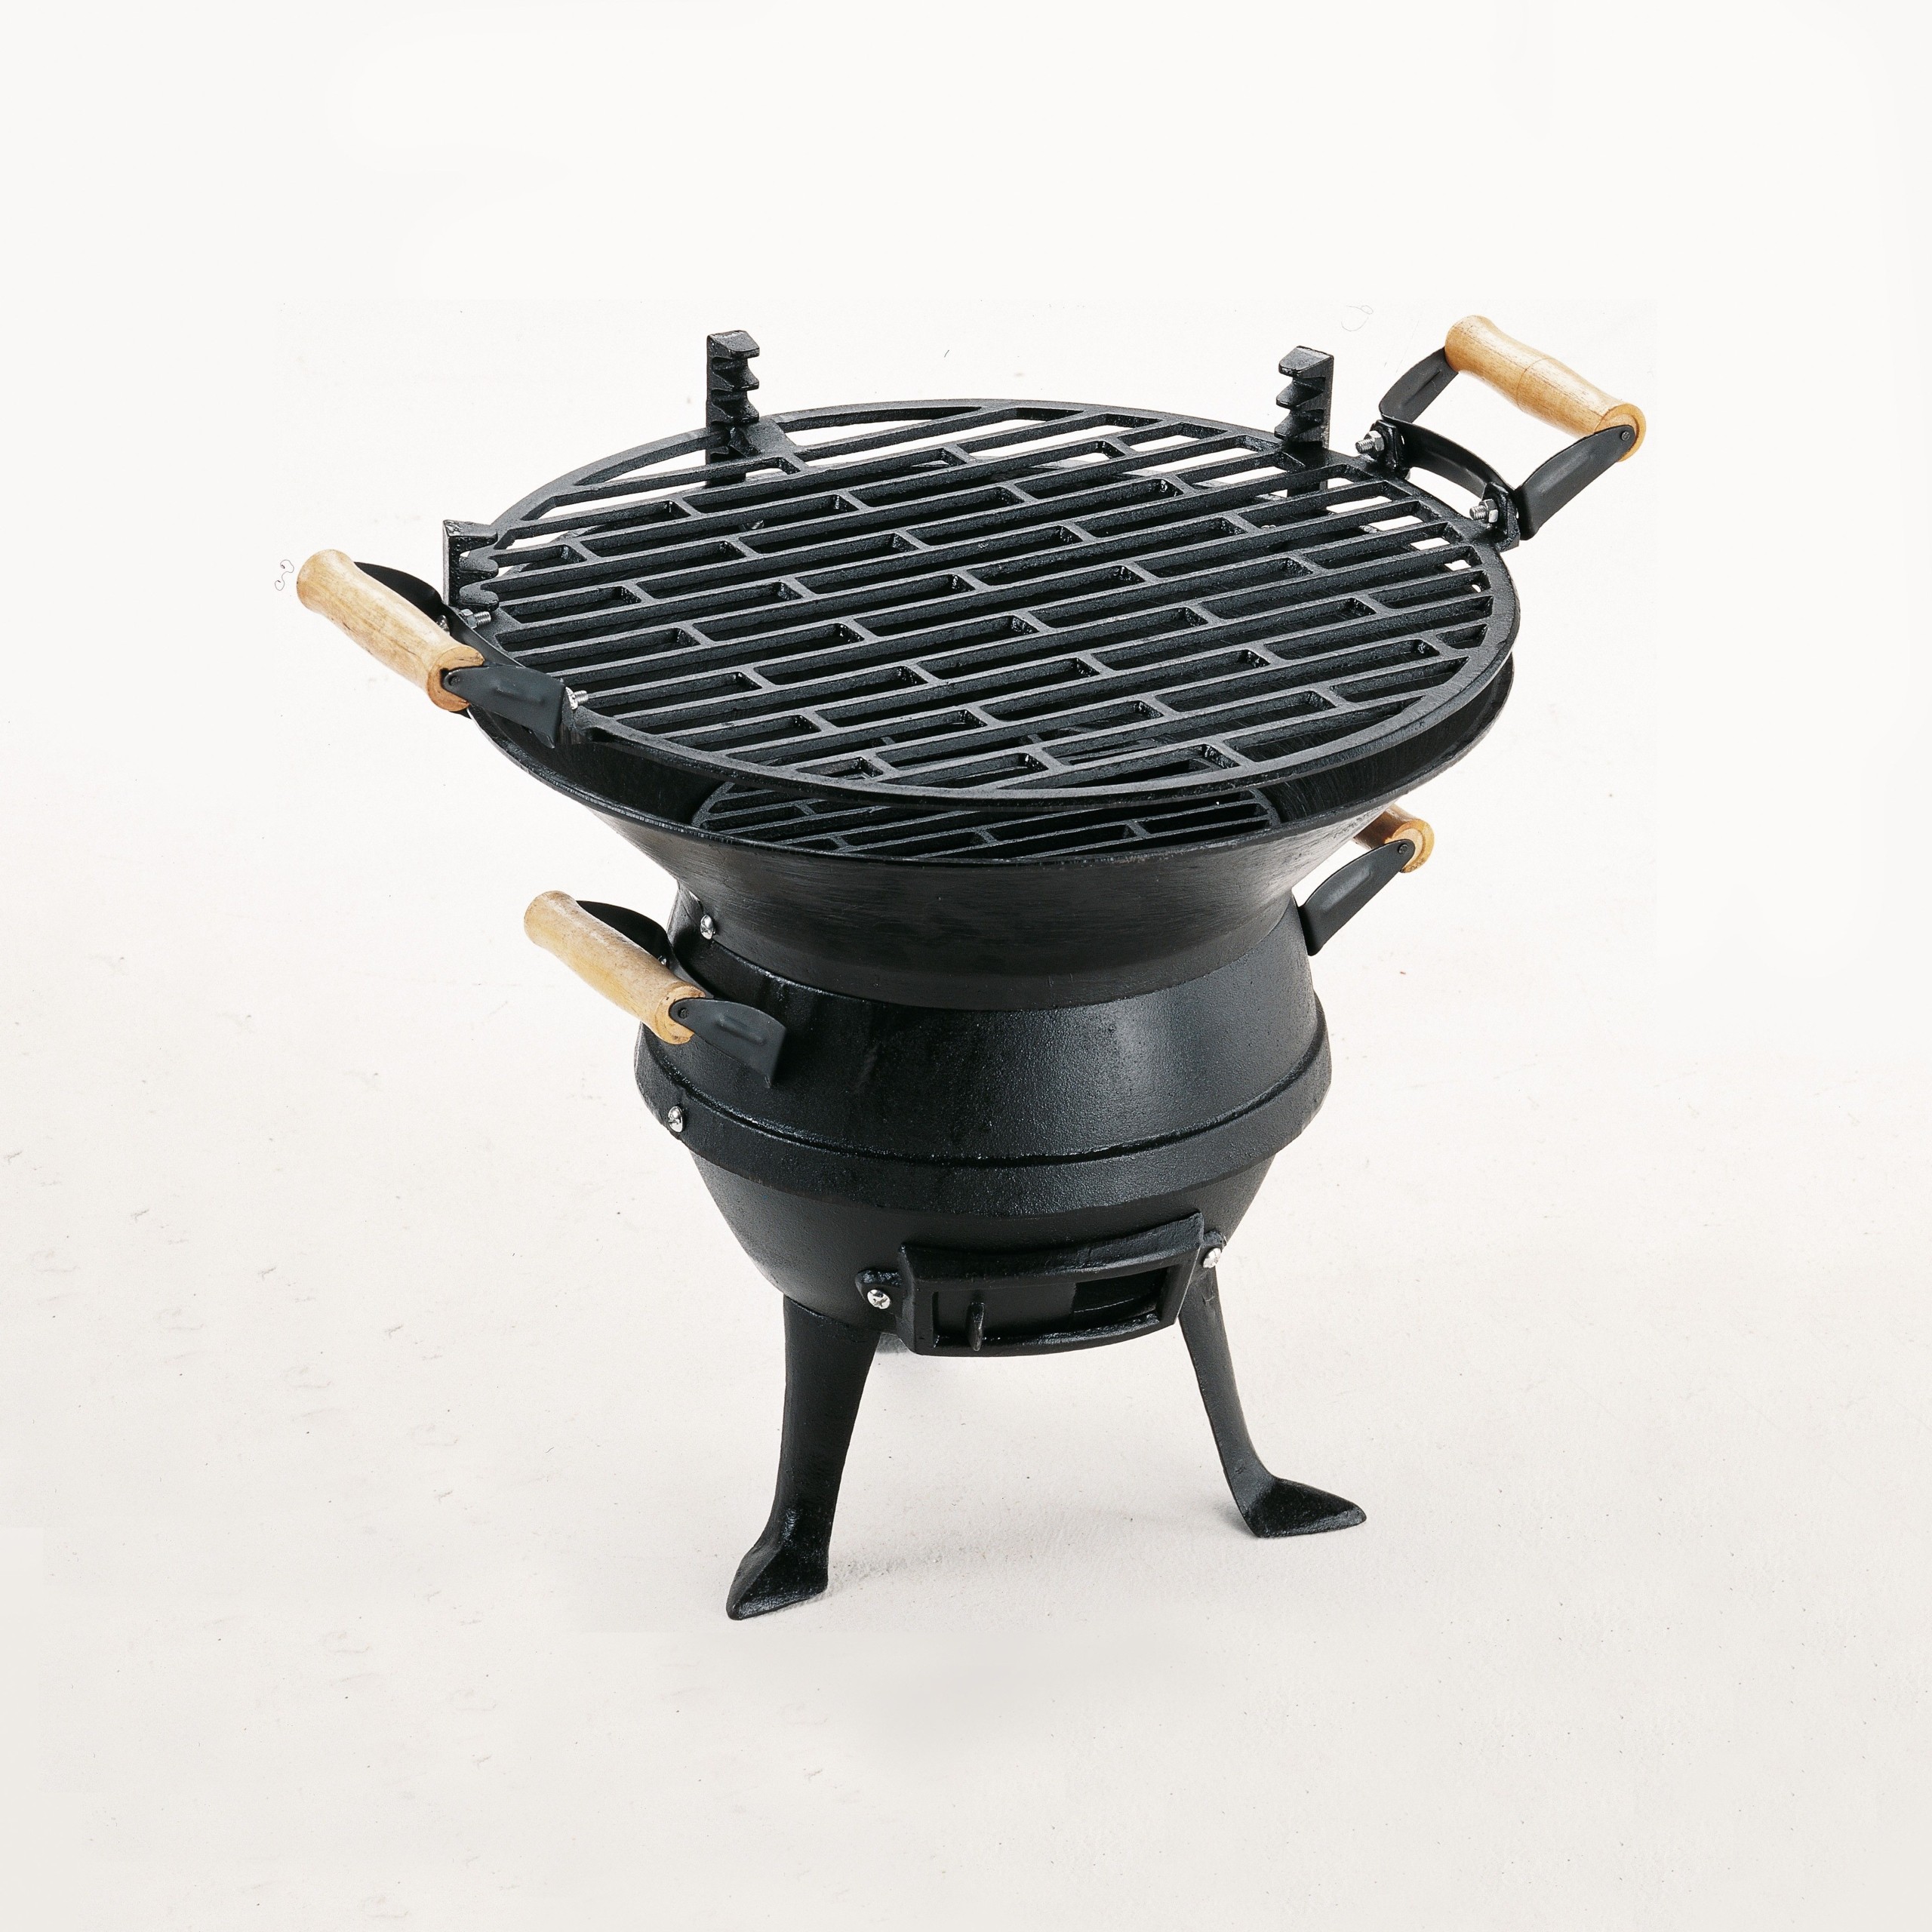 Quality cast iron barbecue outdoor cooking grills charcoal garden